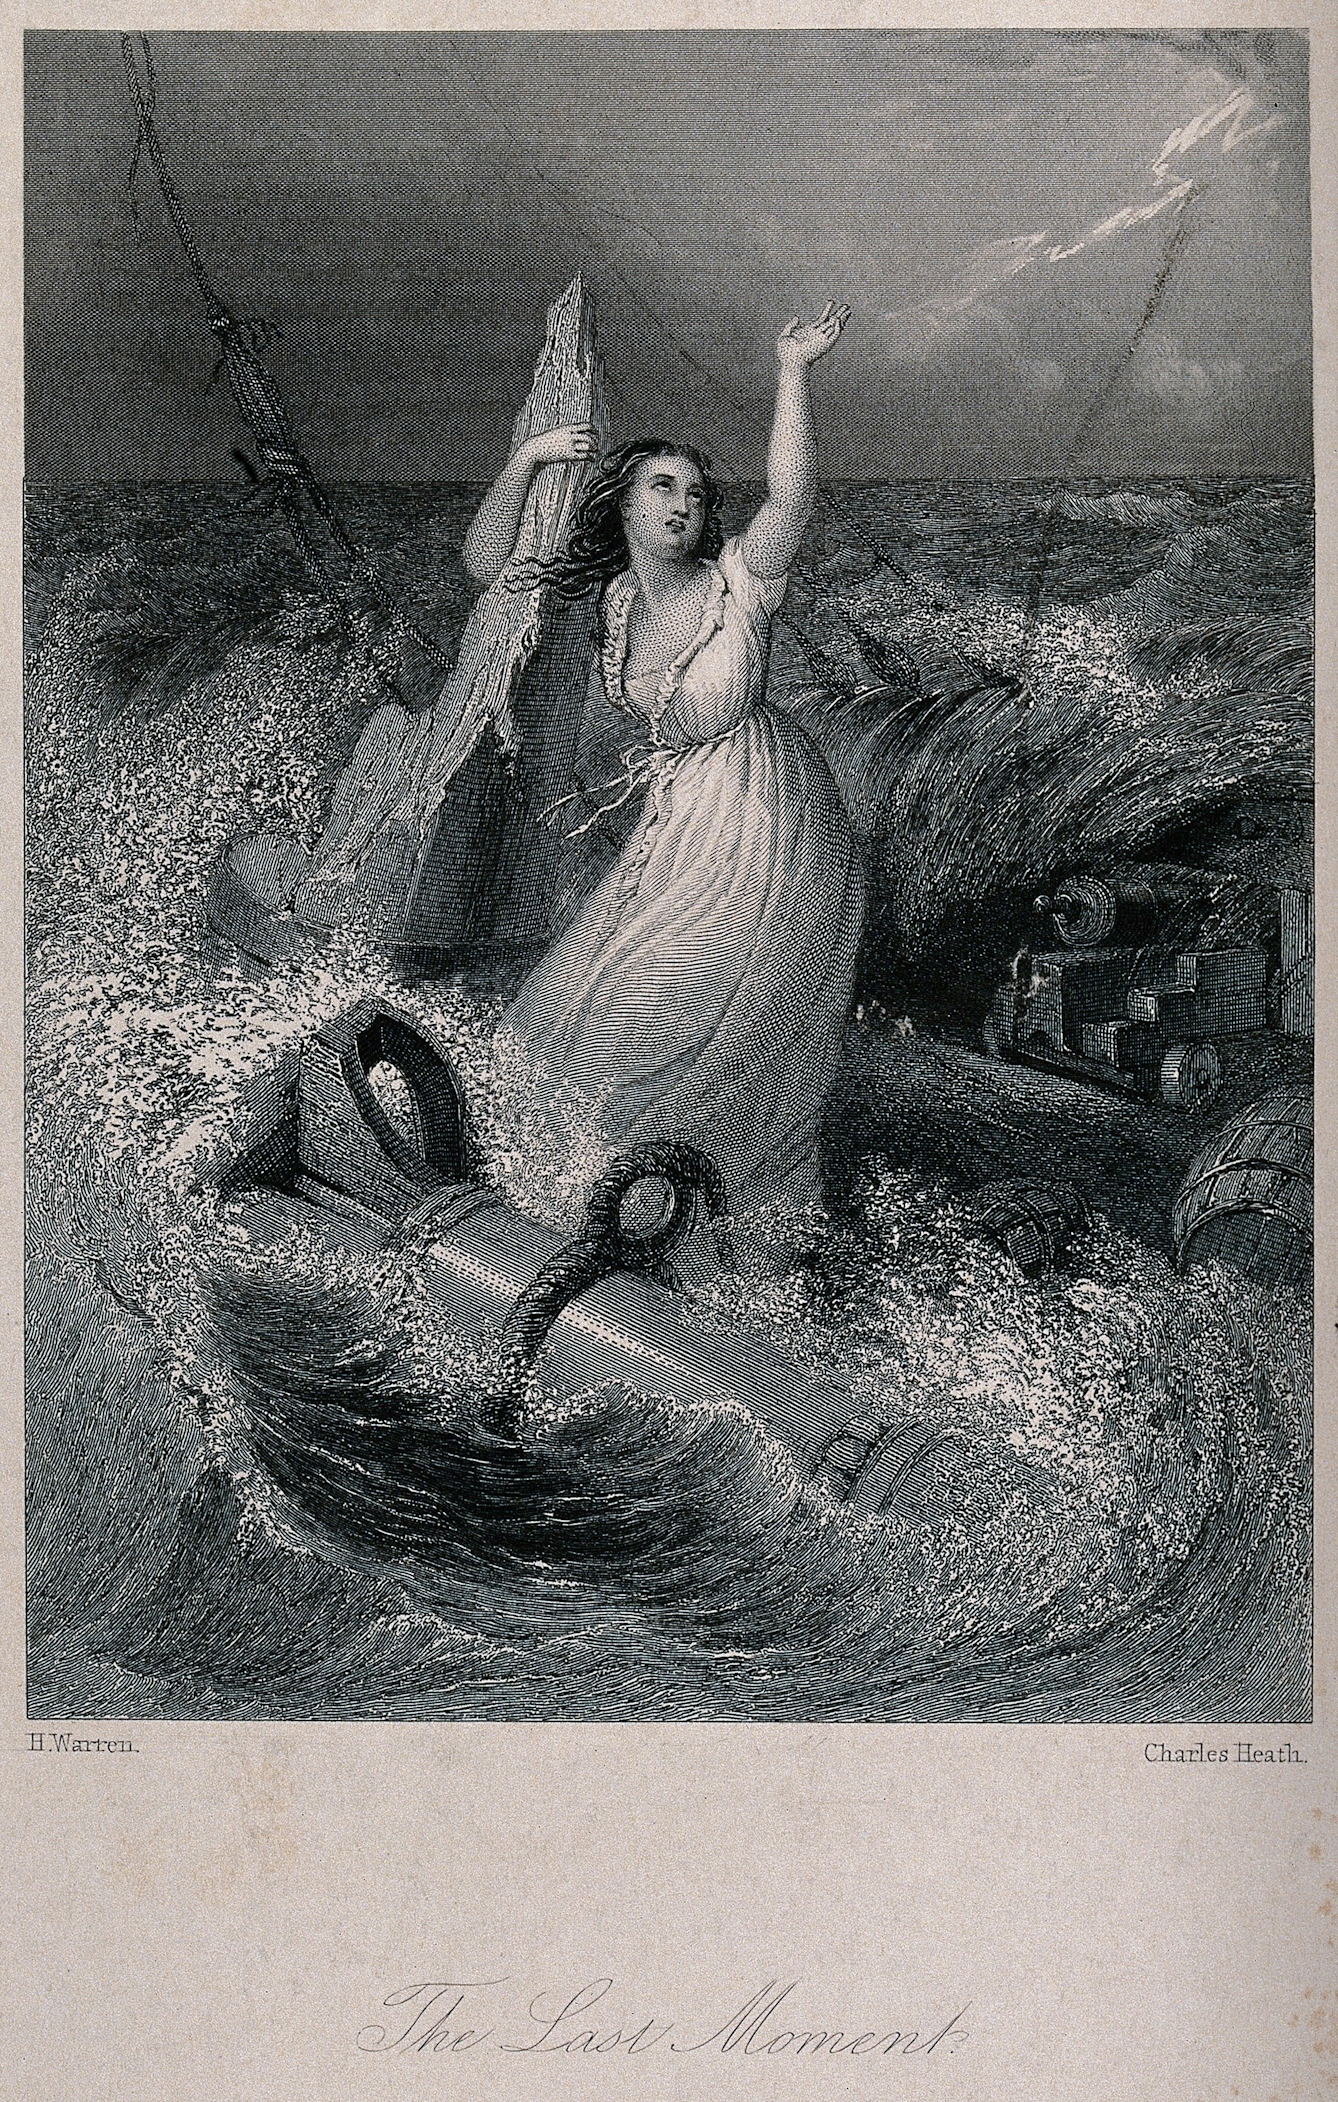 A shipwrecked lady holds on to the remains of a ship-mast waving for help in the stormy sea. Engraving by C Heath after H Warren.